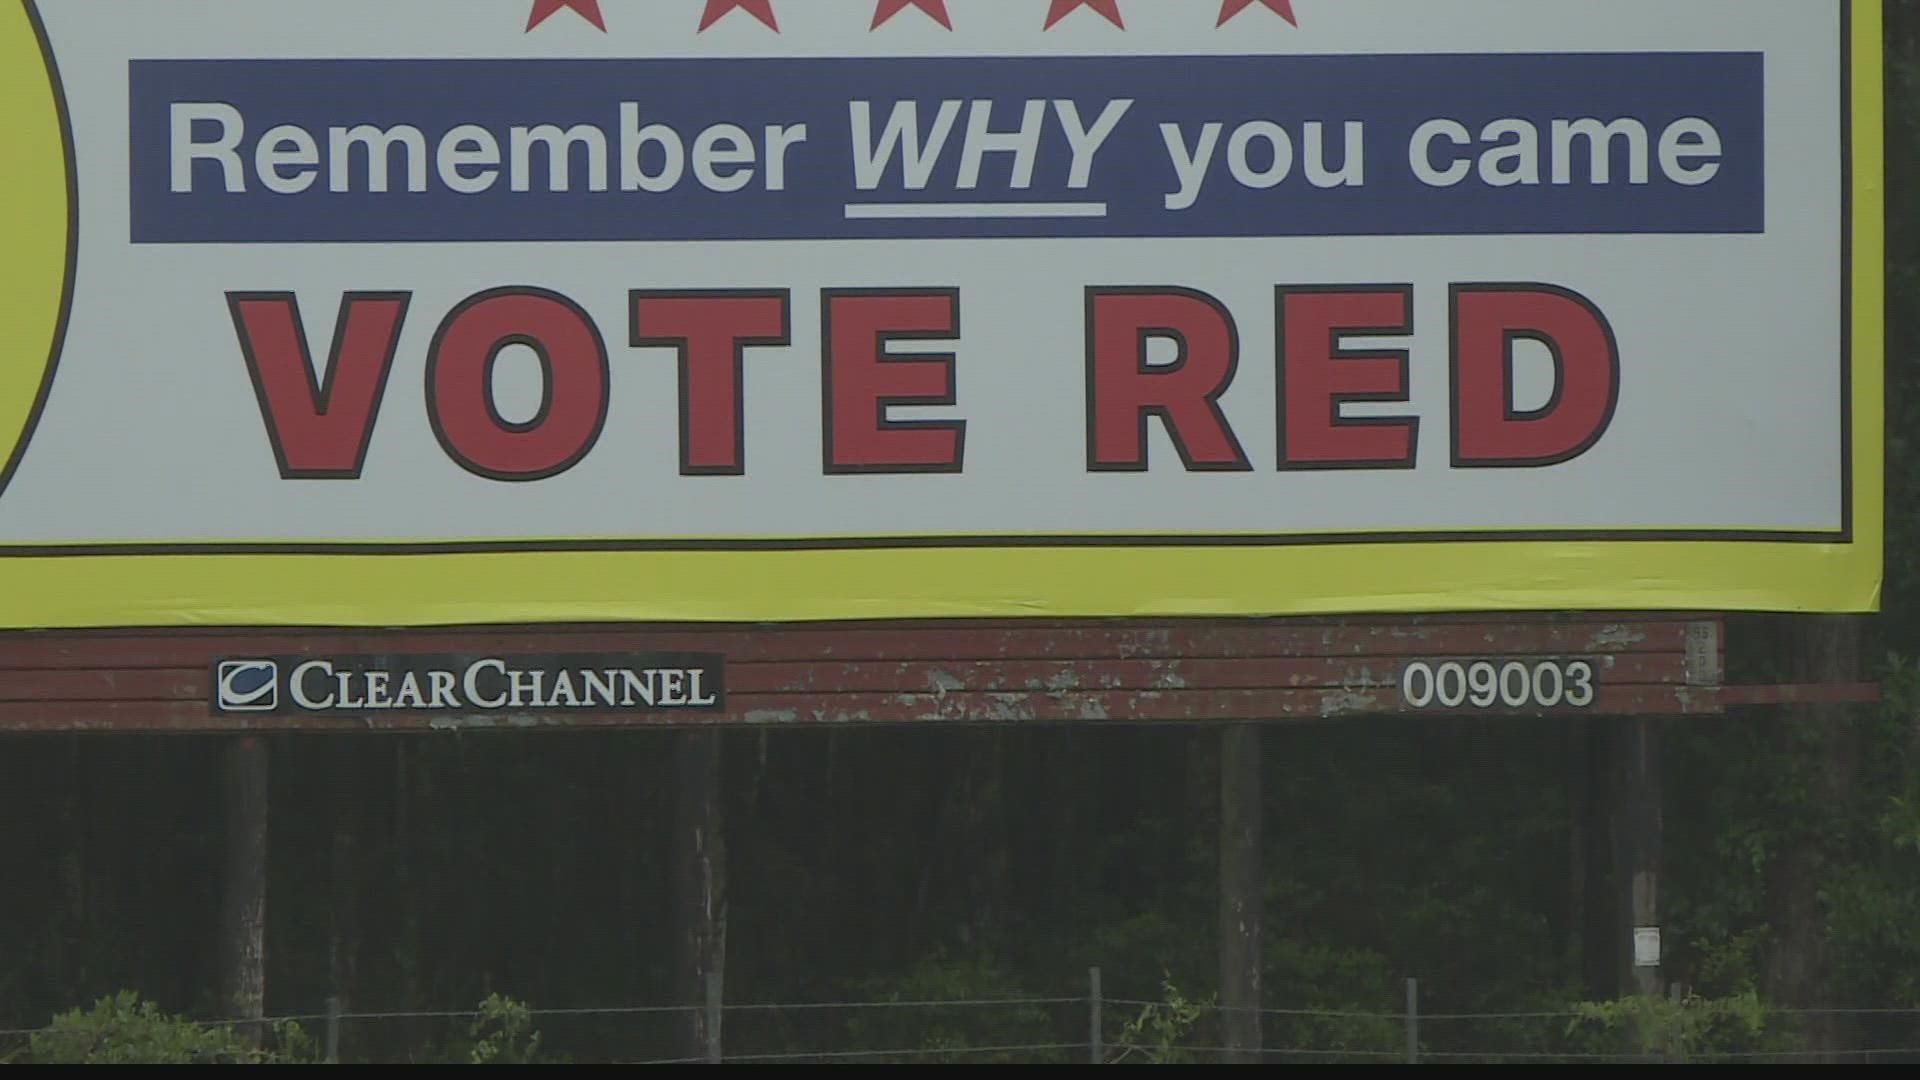 ABJ Renovations, a home renovation company in Nassau County paid for the billboard. The owner wants people to vote republican.